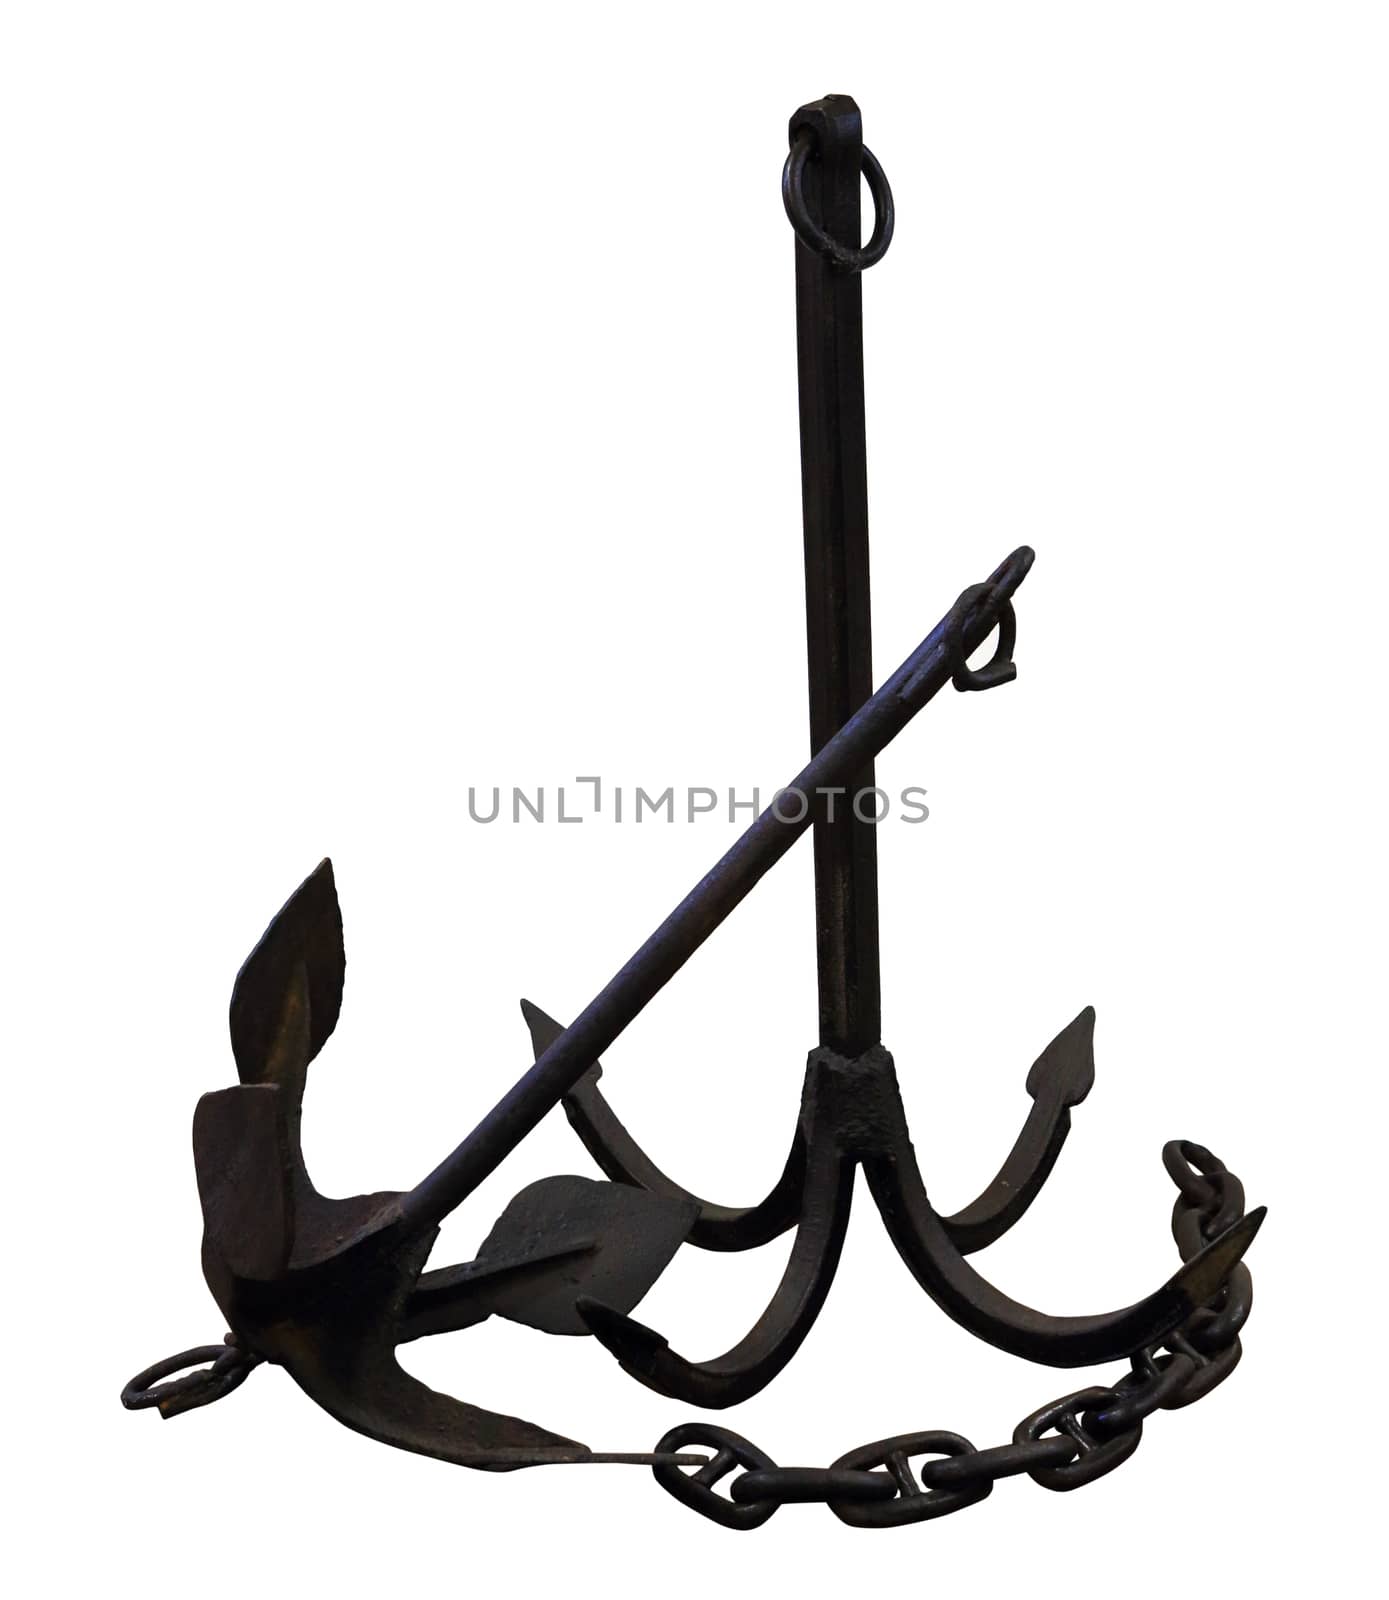 Old metal anchor on the white background, isolated